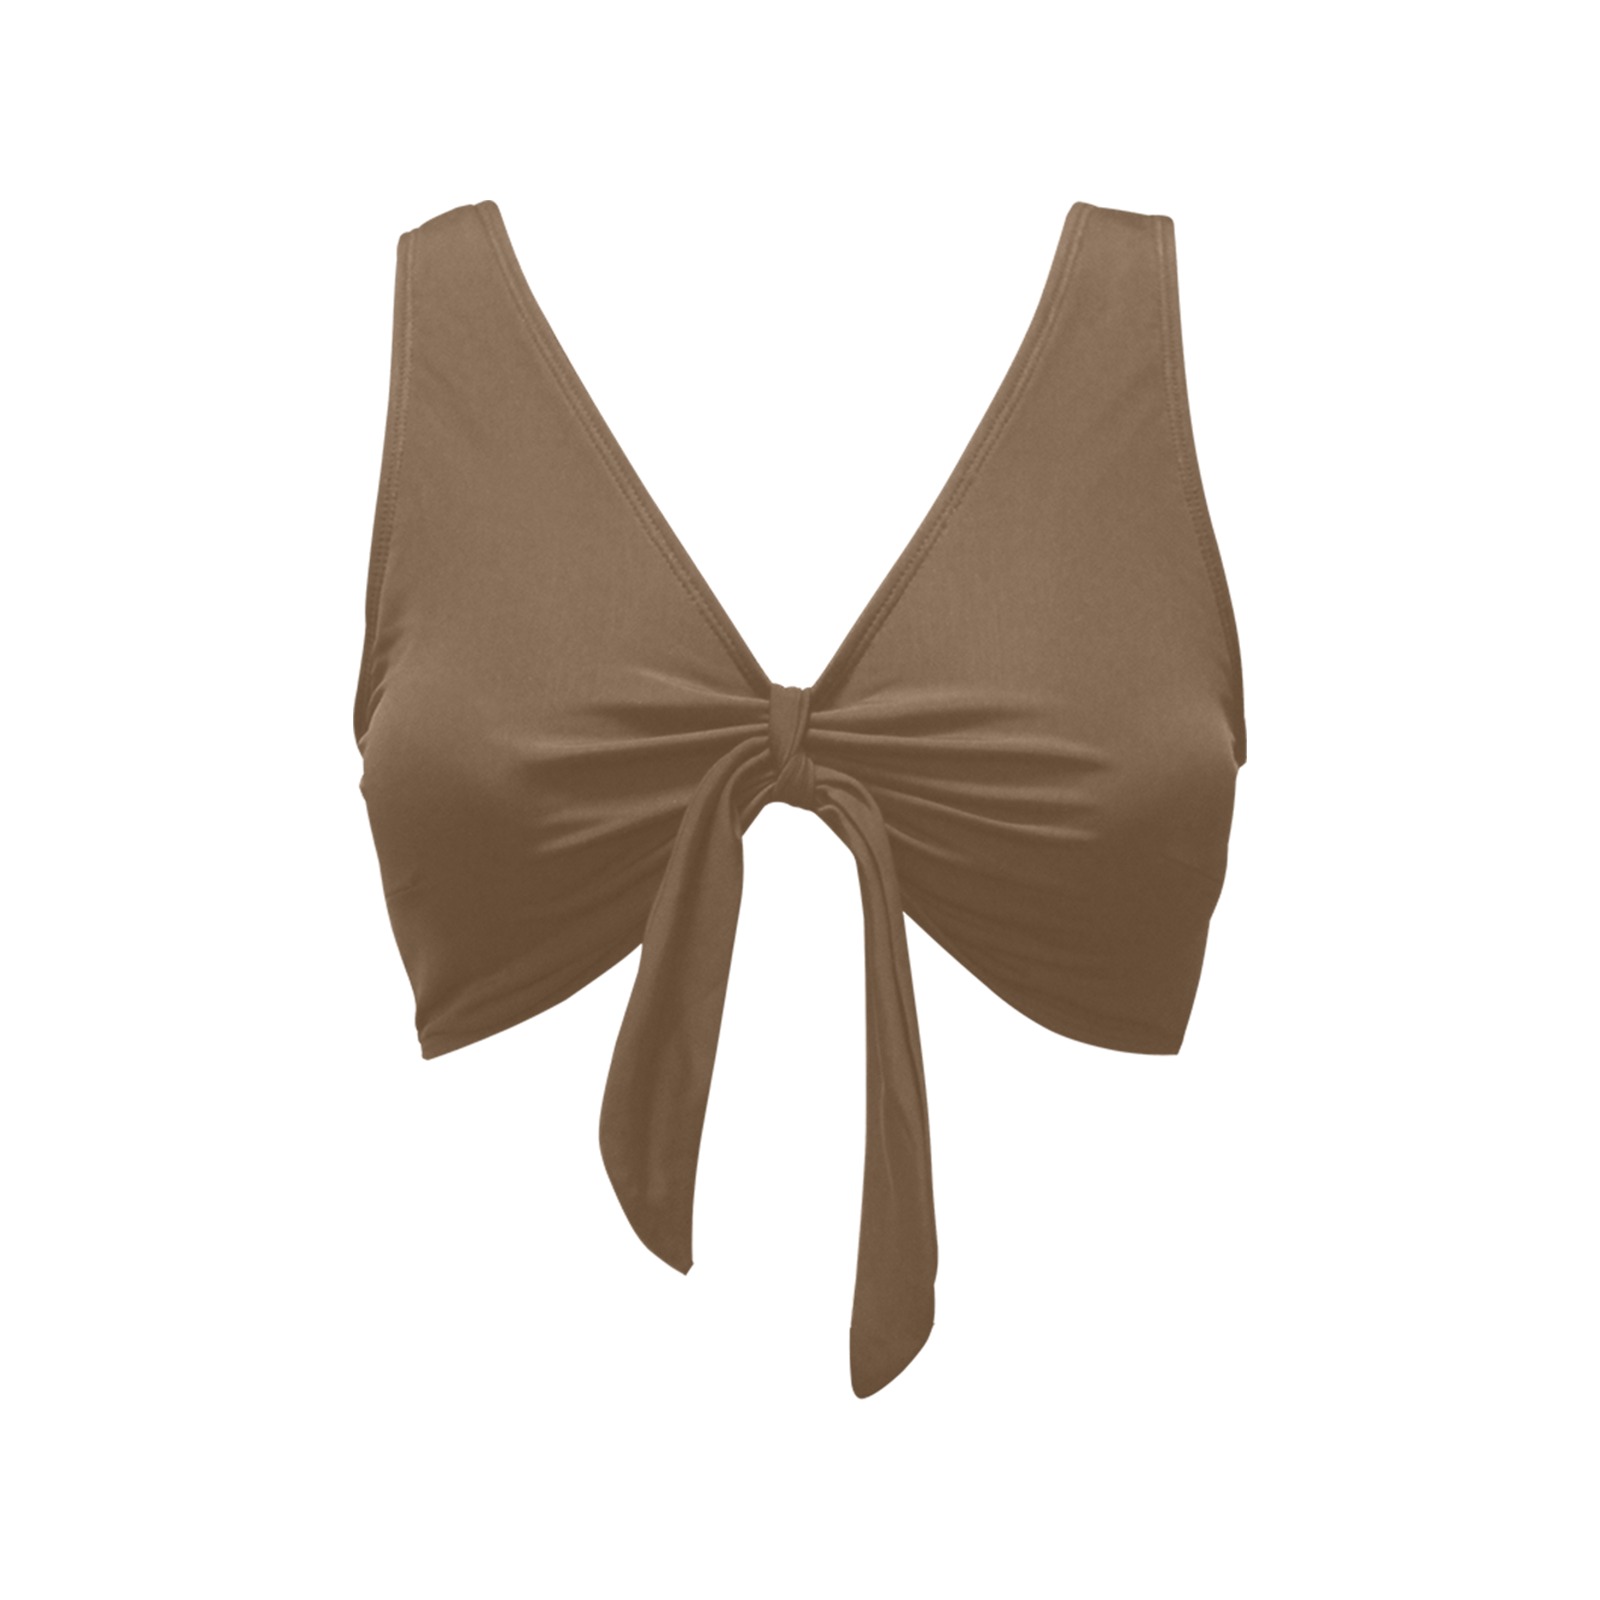 Solid Colors Brown Chest Bowknot Bikini Top (Model S33)